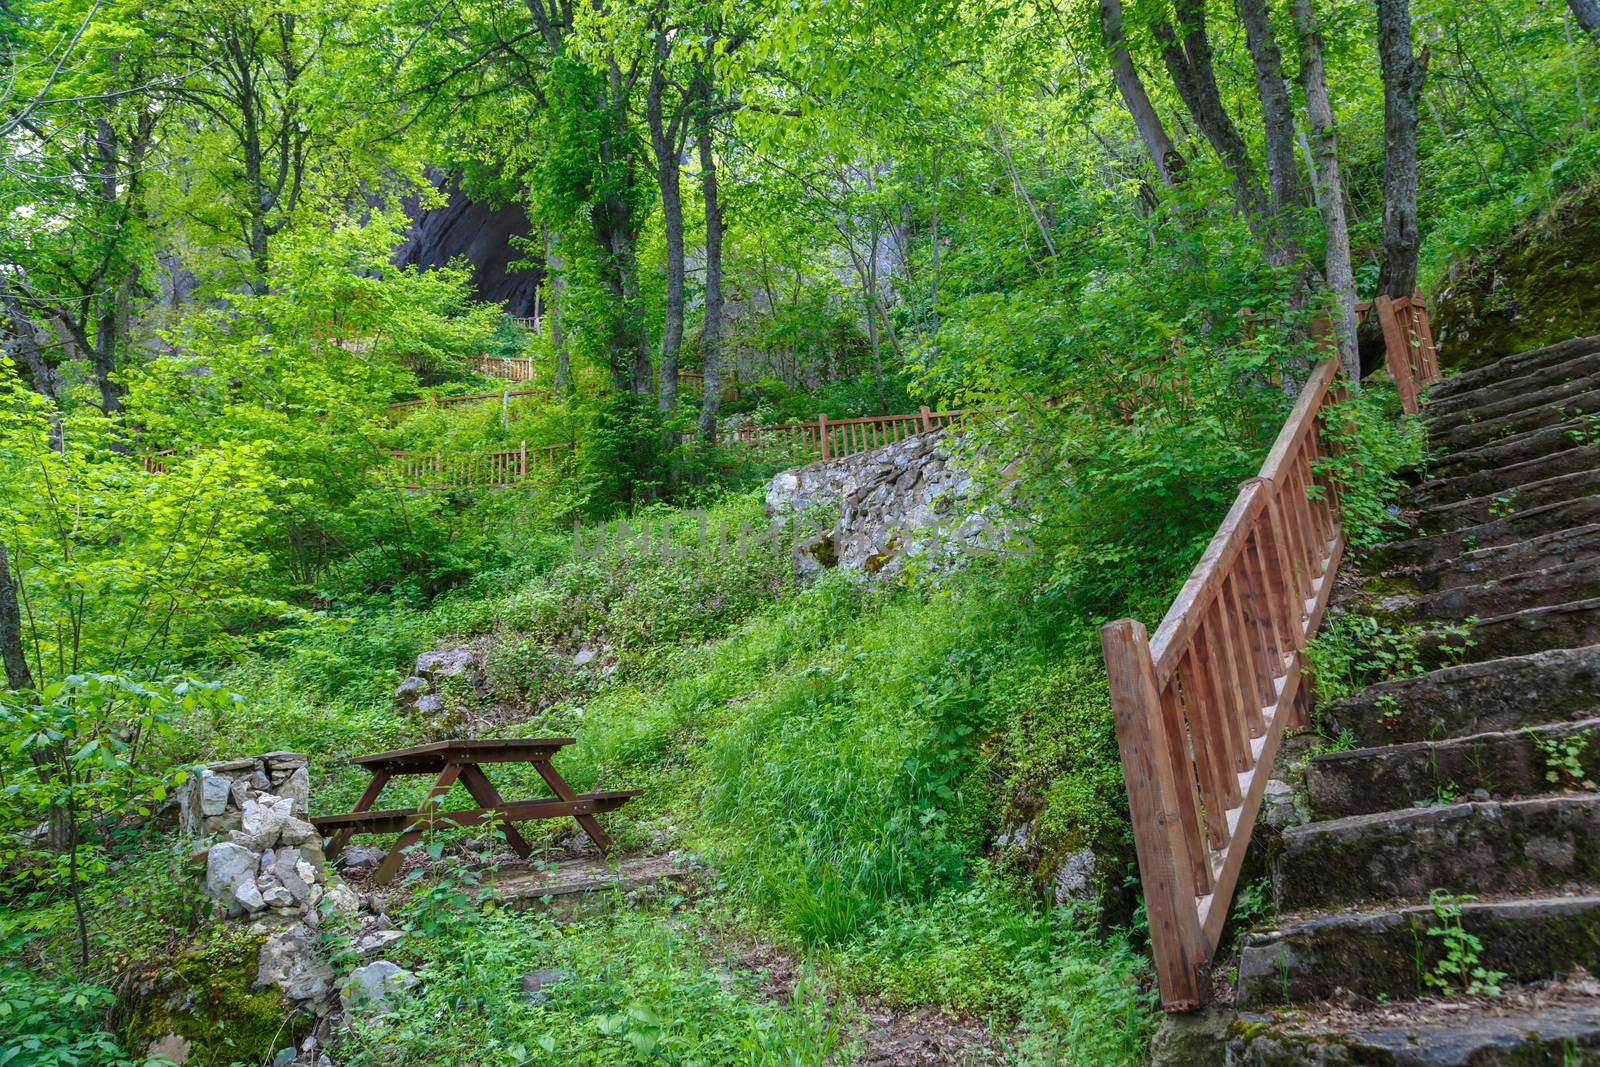 Landscape view of intense Black Sea forests with green trees, meadow area and wooden stairs.